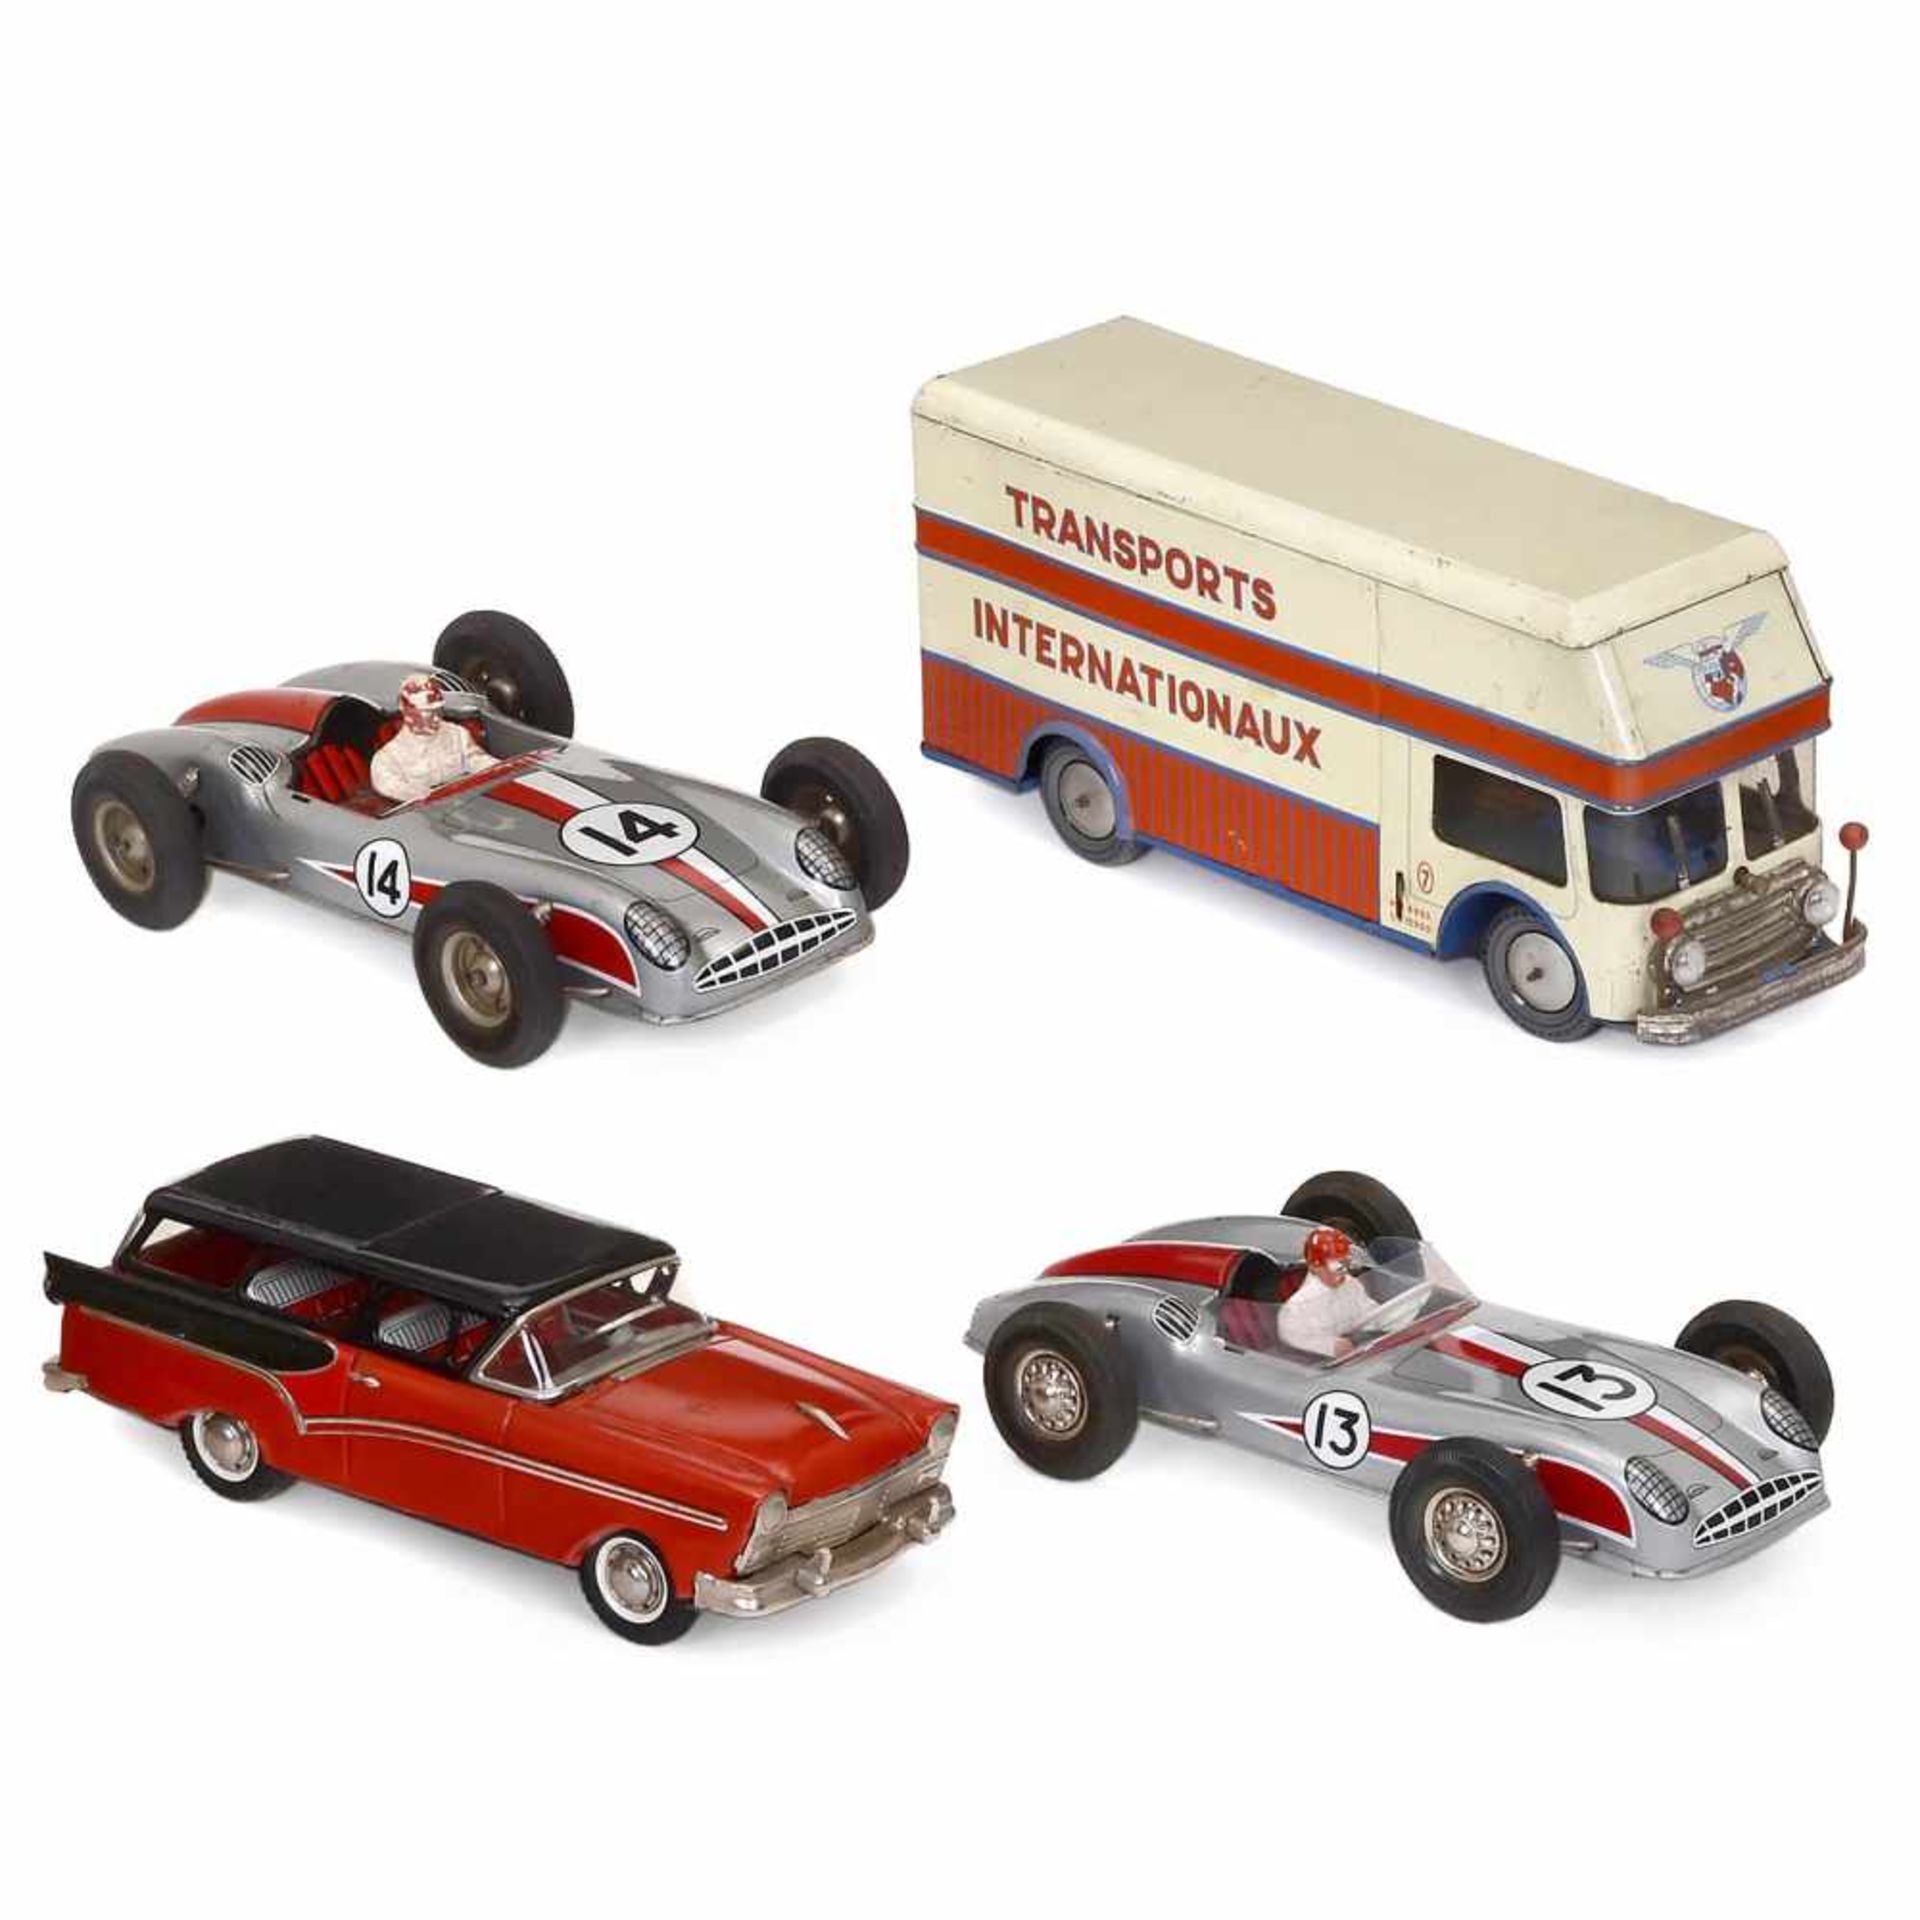 4 French Tin-Toy Cars by Joustra, c. 1950-60Lithographed tin. 1) Ford station wagon, friction